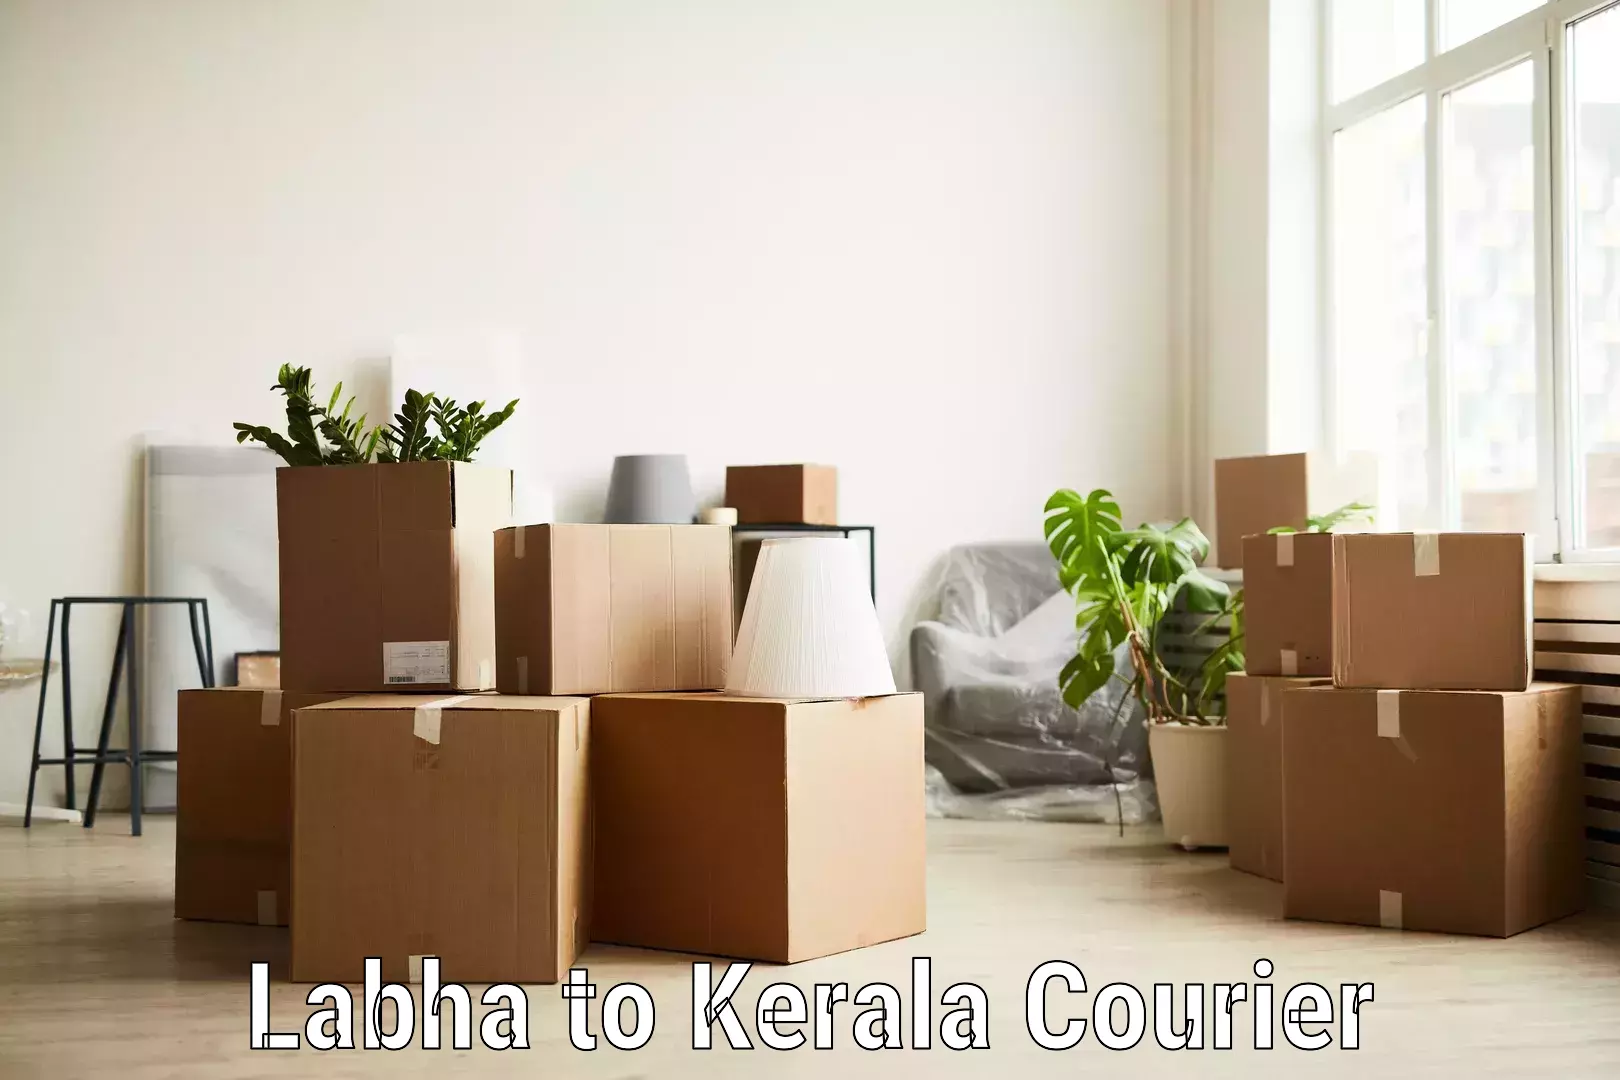 Efficient courier operations Labha to Cochin Port Kochi